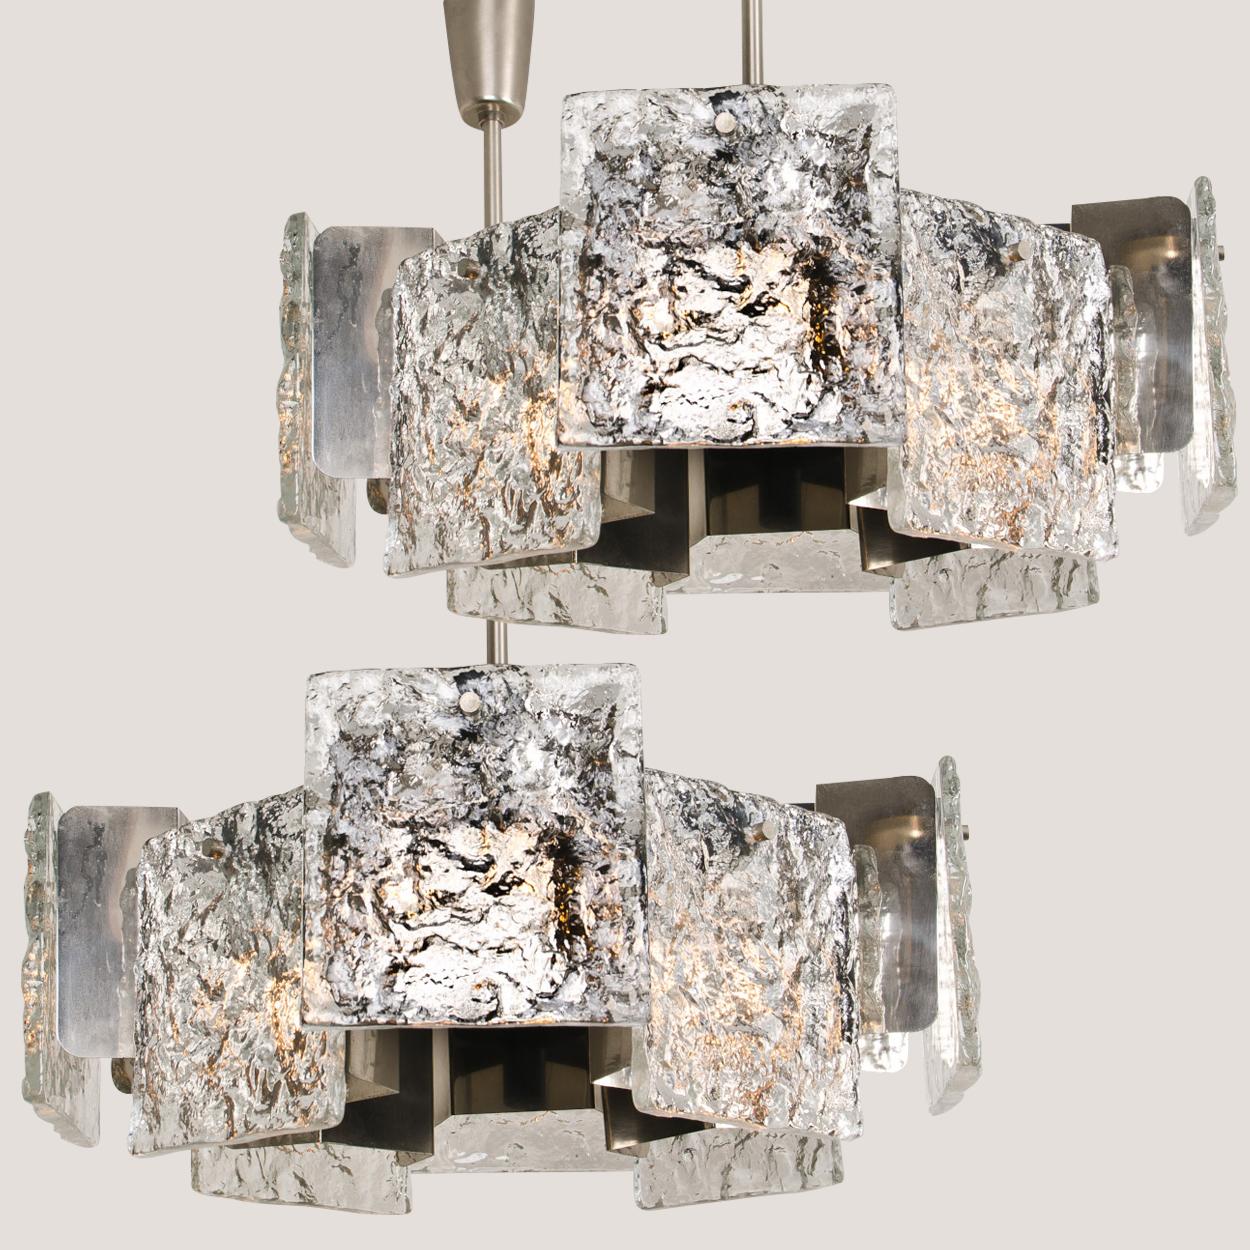 This pair of high-end chandeliers where designed and manufactured by J. T. Kalmar, Austria, circa 1960. Each fixture takes 16 bulbs and features eight handmade solid glass elements made from Murano glass. The frame is made from chrome-plated and